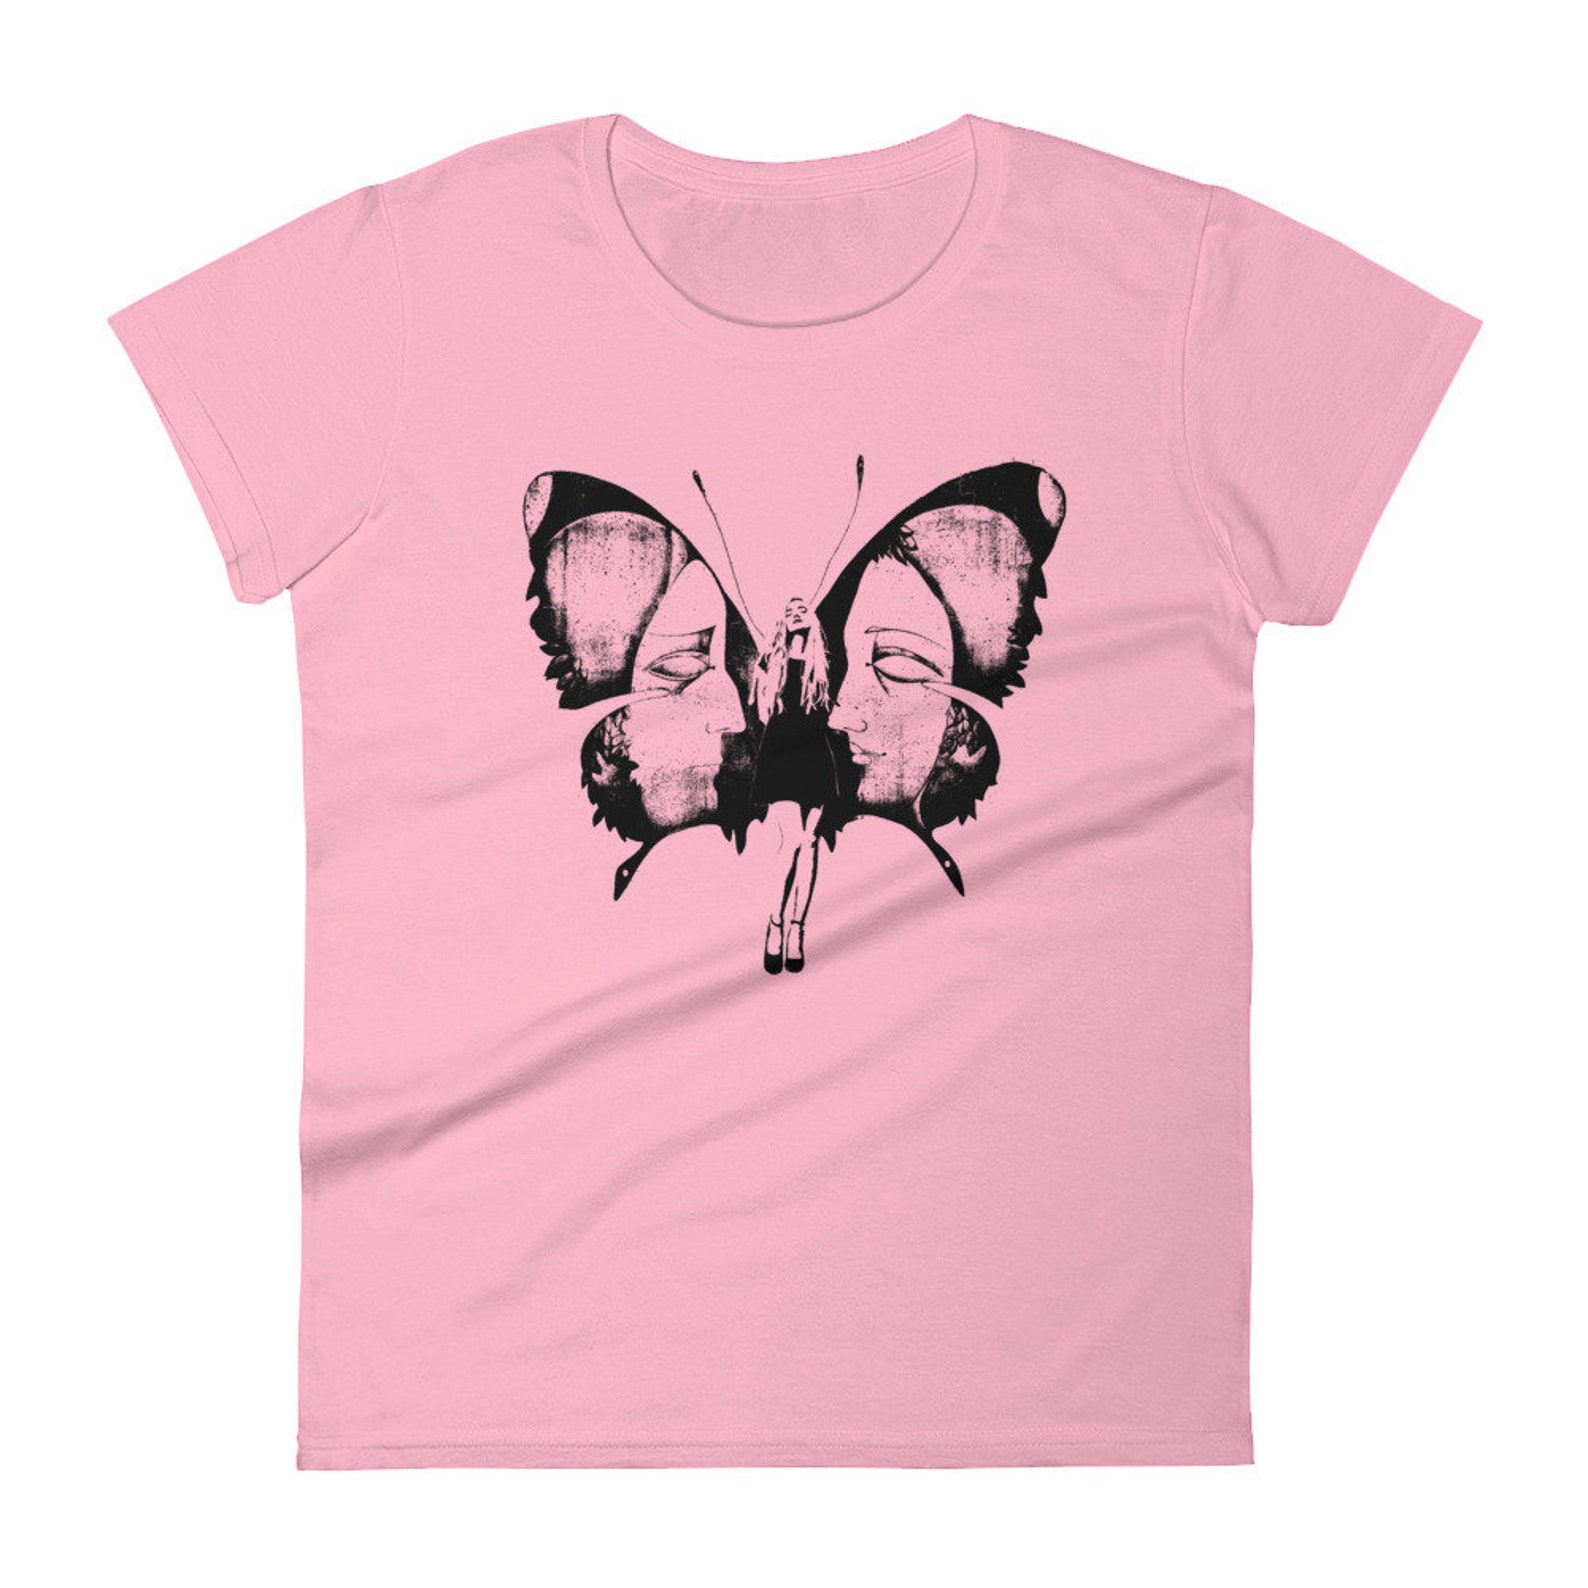 T-Shirt Woman Butterfly Girl | Etsy